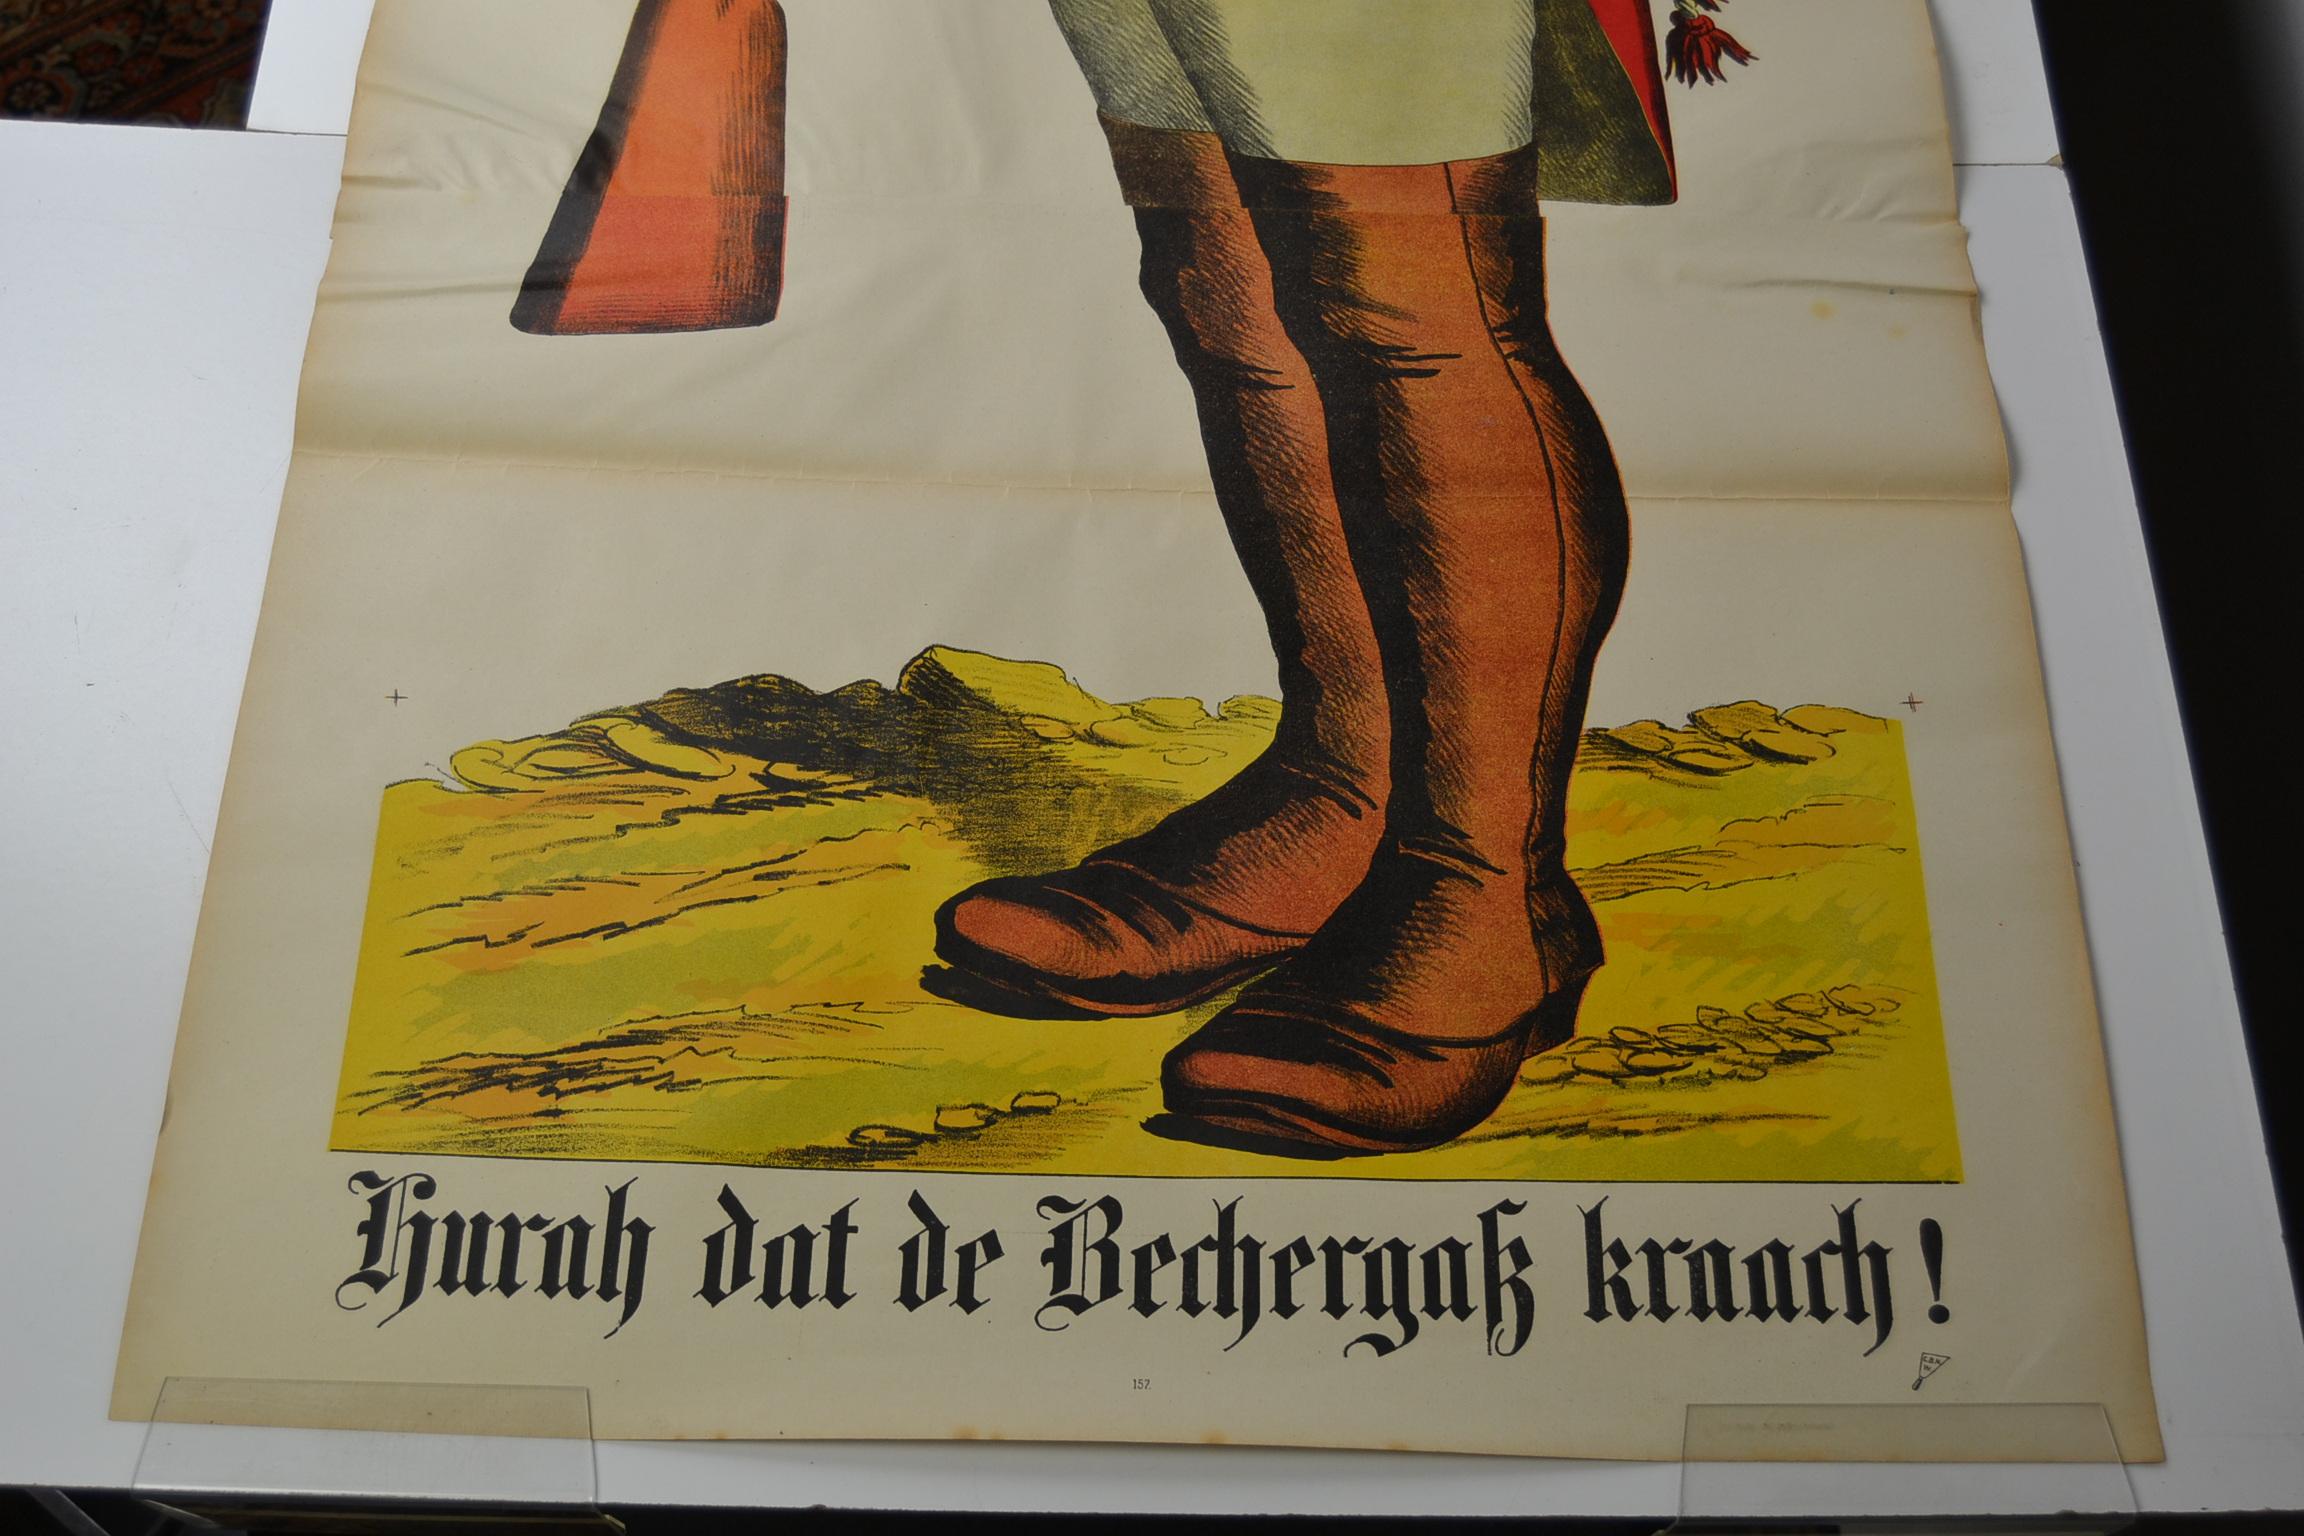 European 1880s Life-Size Stone Lithography Poster with an Officer, Europe